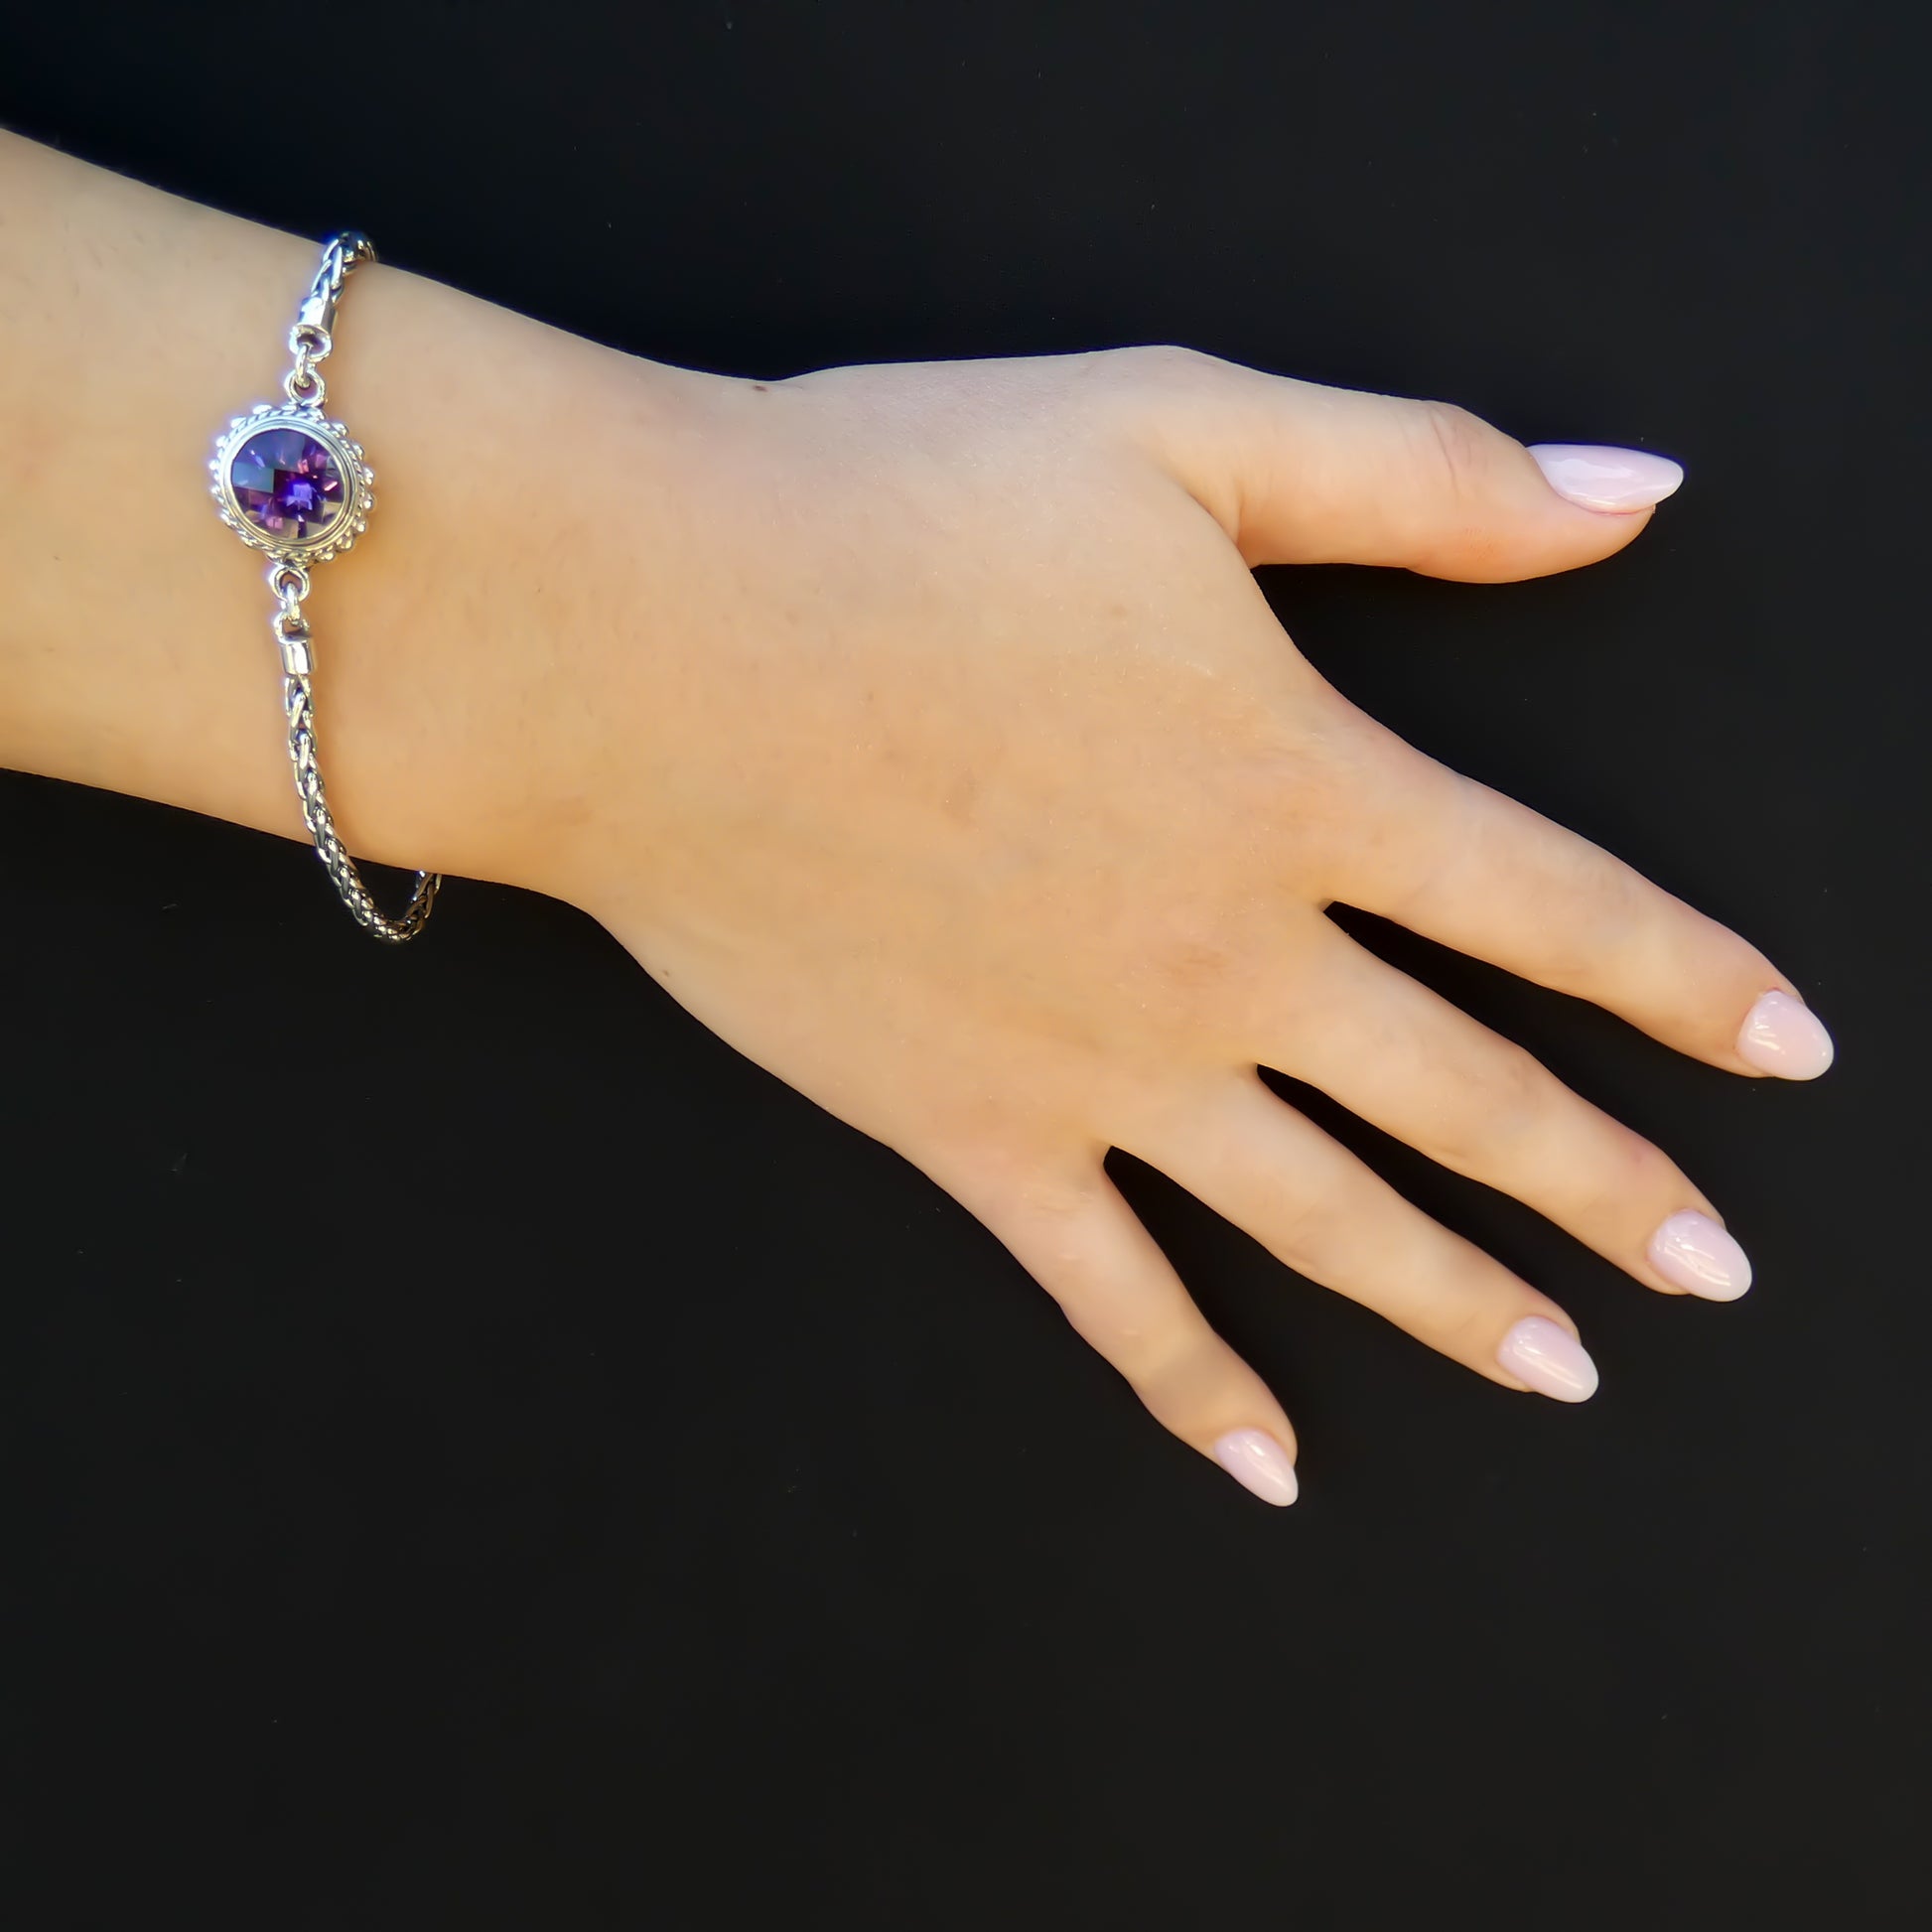 Woman wearing a silver bracelet with wheat chain arms and a single round purple amethyst gemstone in the middle.